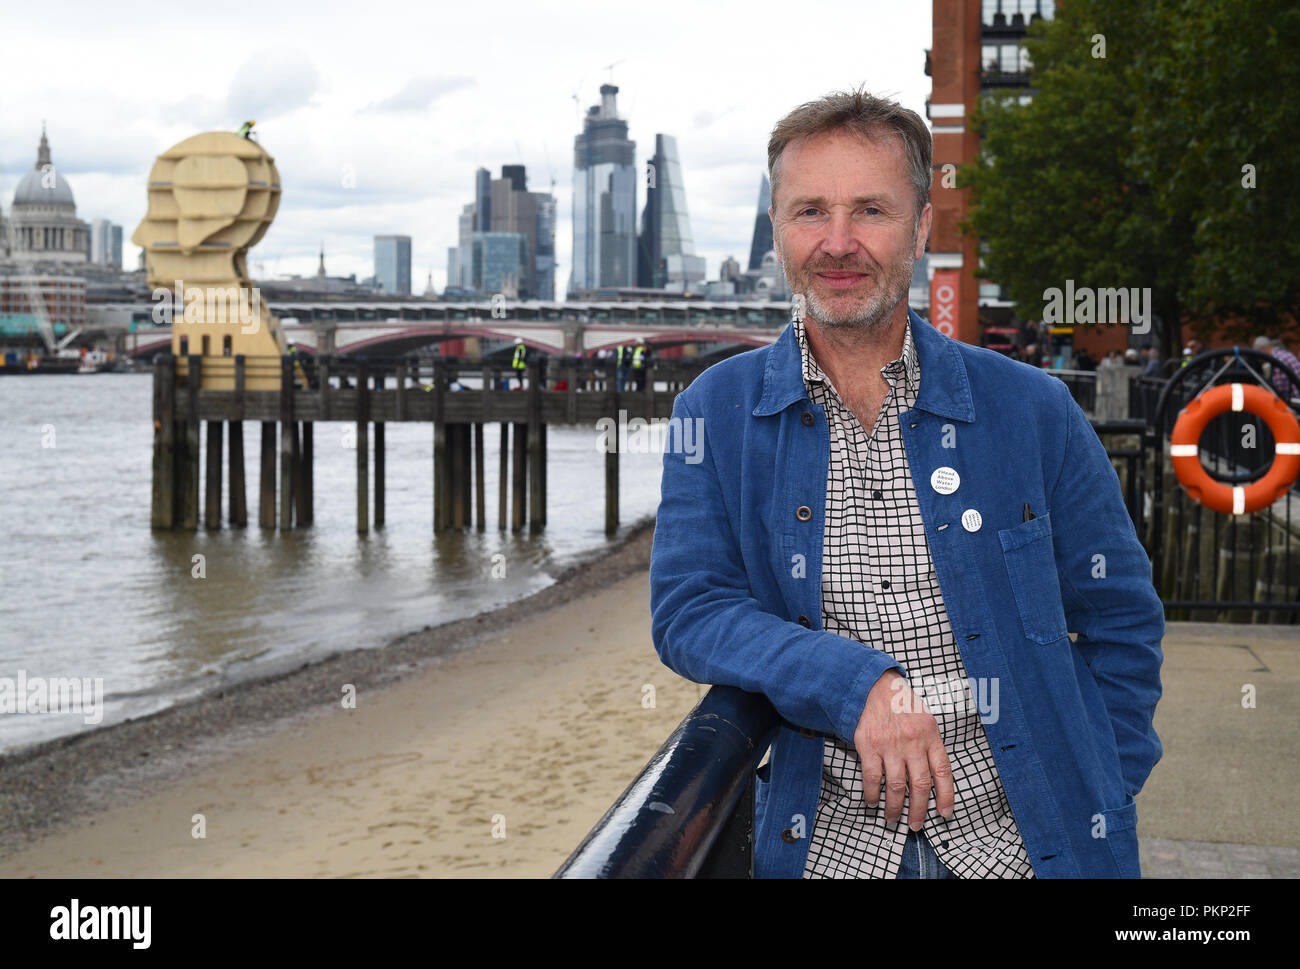 Designer Steuart Padwick with his sculpture Head Above Water, which is in support of anti-stigma mental health campaign Time to Change, at Gabriel's Pier in London. Stock Photo